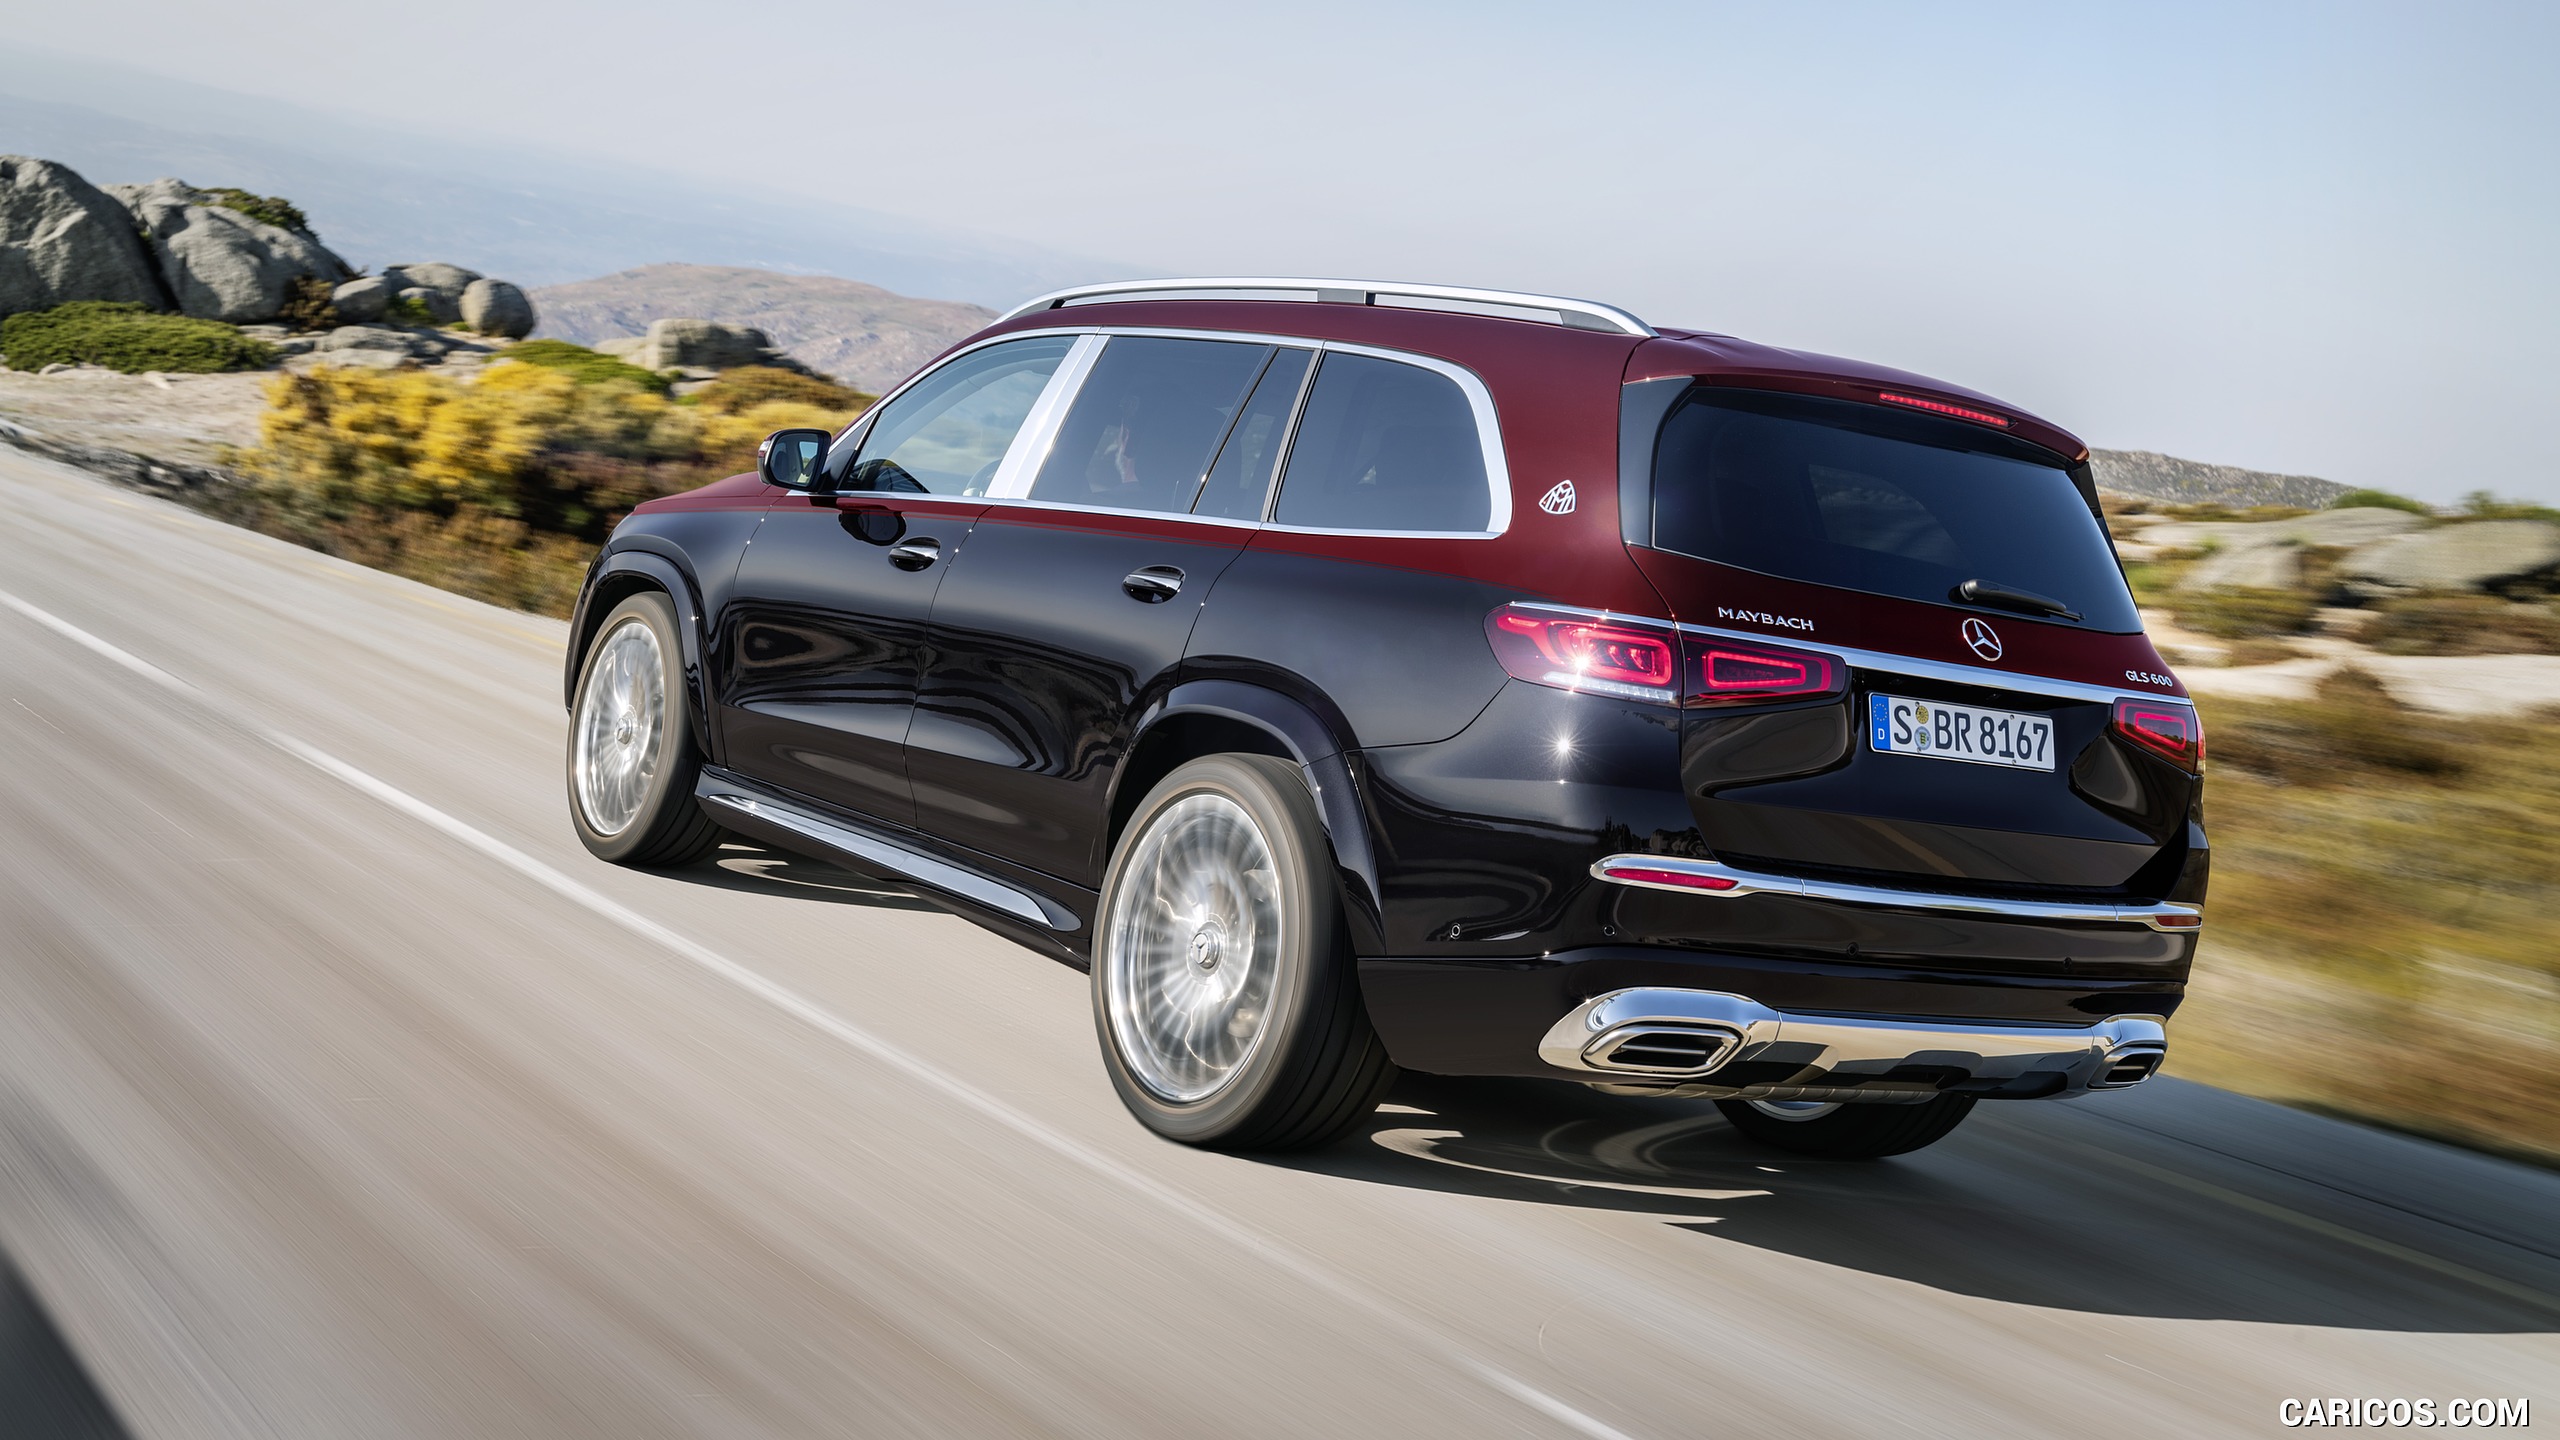 2021 Mercedes-Maybach GLS 600 (Color: Rubellite Red / Obsidian Black) - Rear Three-Quarter, #3 of 297